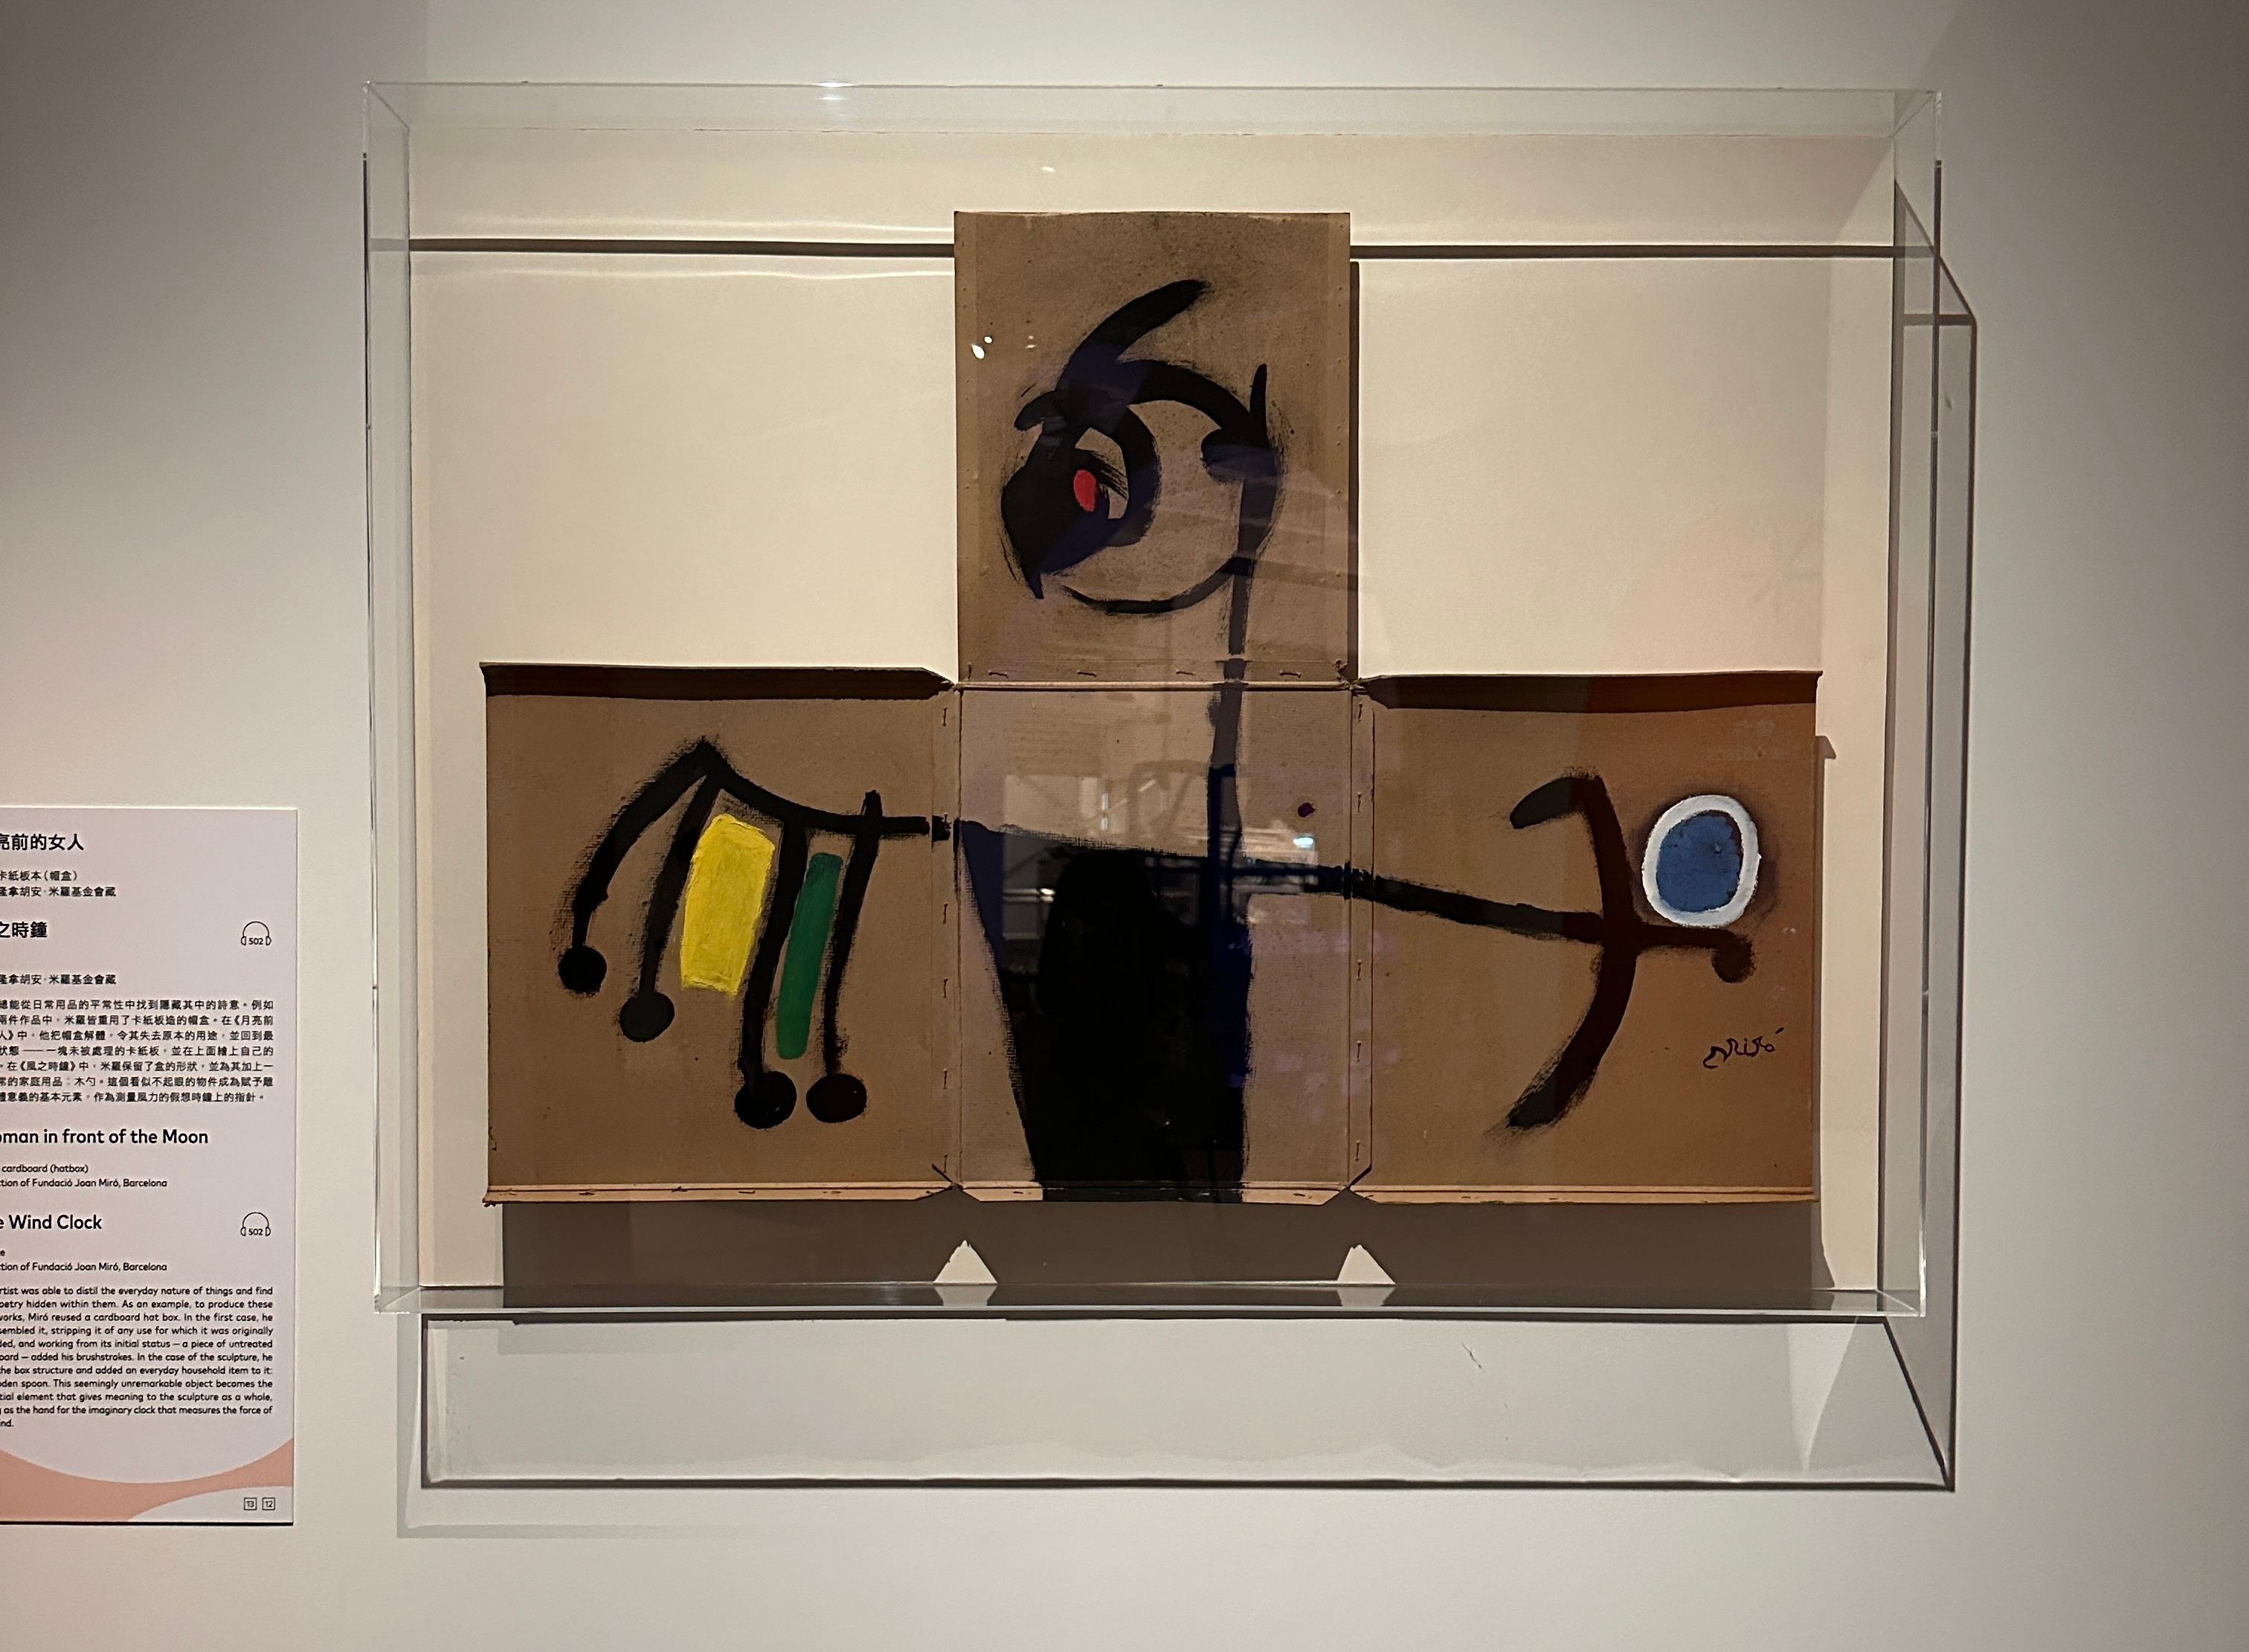 "The Hong Kong Jockey Club Series: Joan Miró - The Poetry of Everyday Life", one of the rare large-scale retrospective exhibitions of Spanish modern art master Joan Miró in Hong Kong in recent years, is being held at the Hong Kong Museum of Art (HKMoA). The exhibition period will be extended to July 2. Picture shows Miró’s work, "Woman in front of the moon" in 1976 
